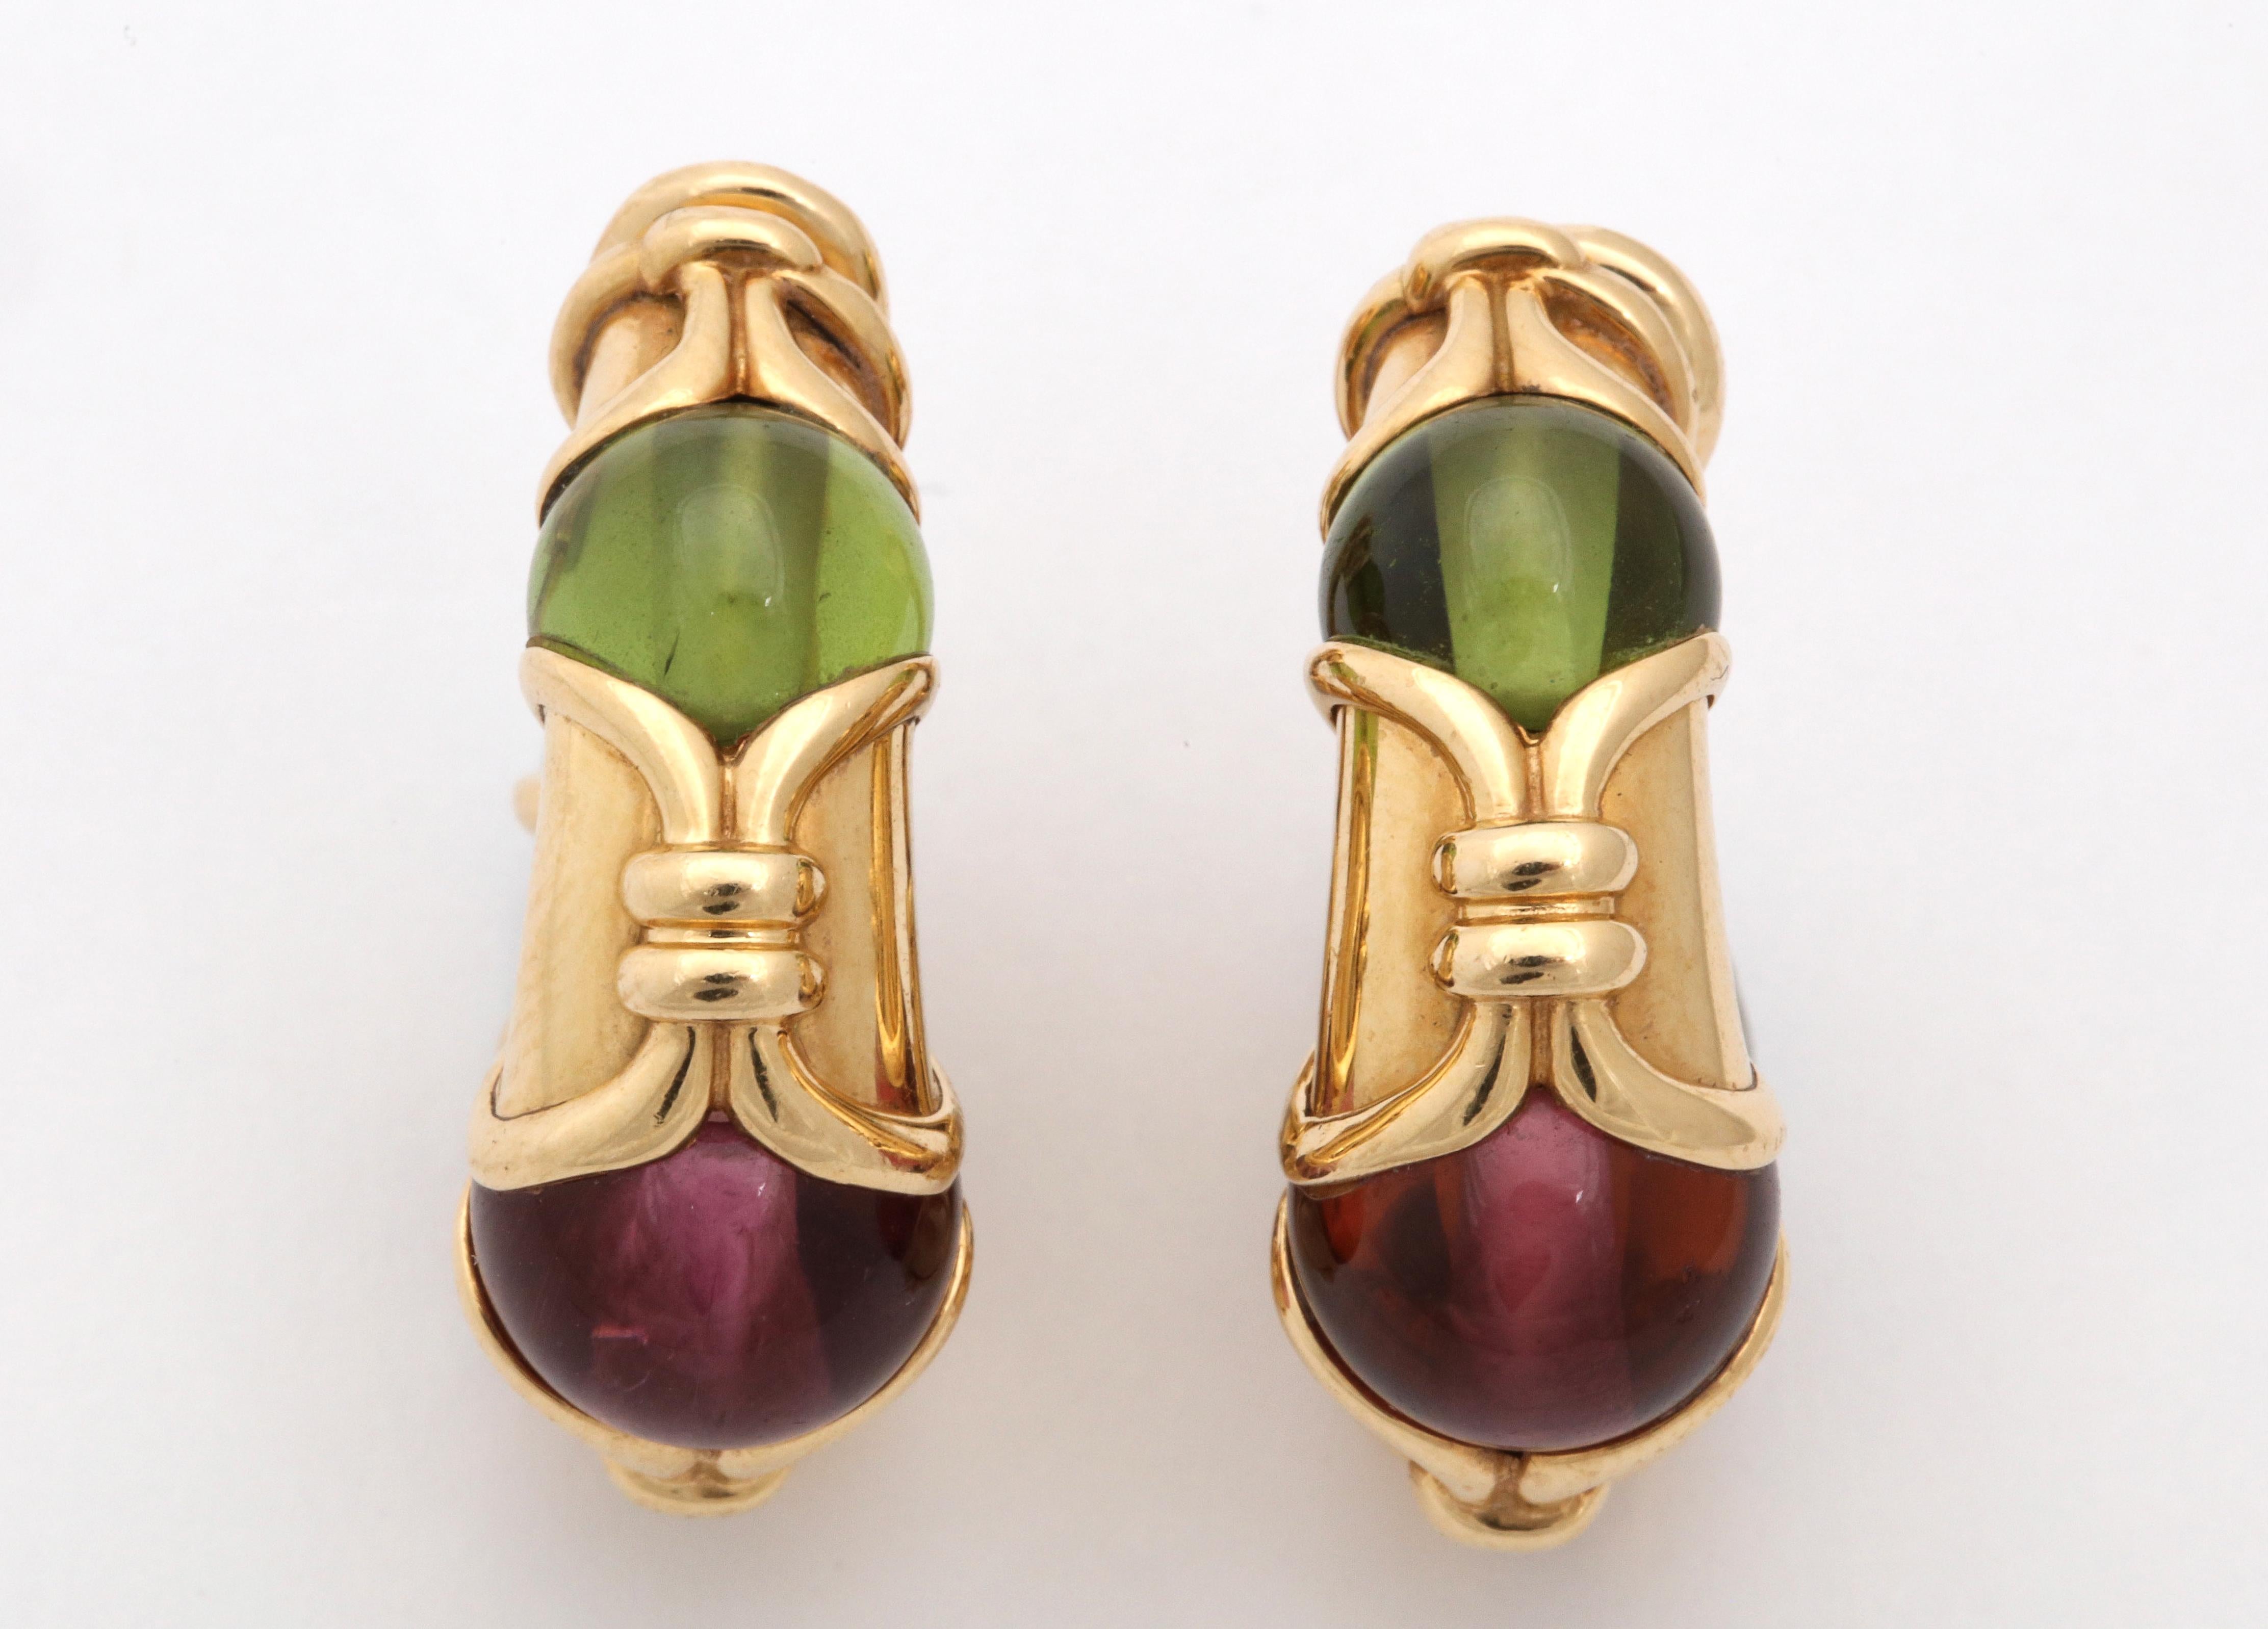 One Pair Of Ladies 18kt High Quality Yellow Gold Half Hoop Earrings Designed With Two Cabochon Pink Tourmalines And Two Cabochon Peridot Stones And With Two Cabochon Citrine Stones. Created By Bulgari In The 1980,s In Italy. Note Posts May Be Added